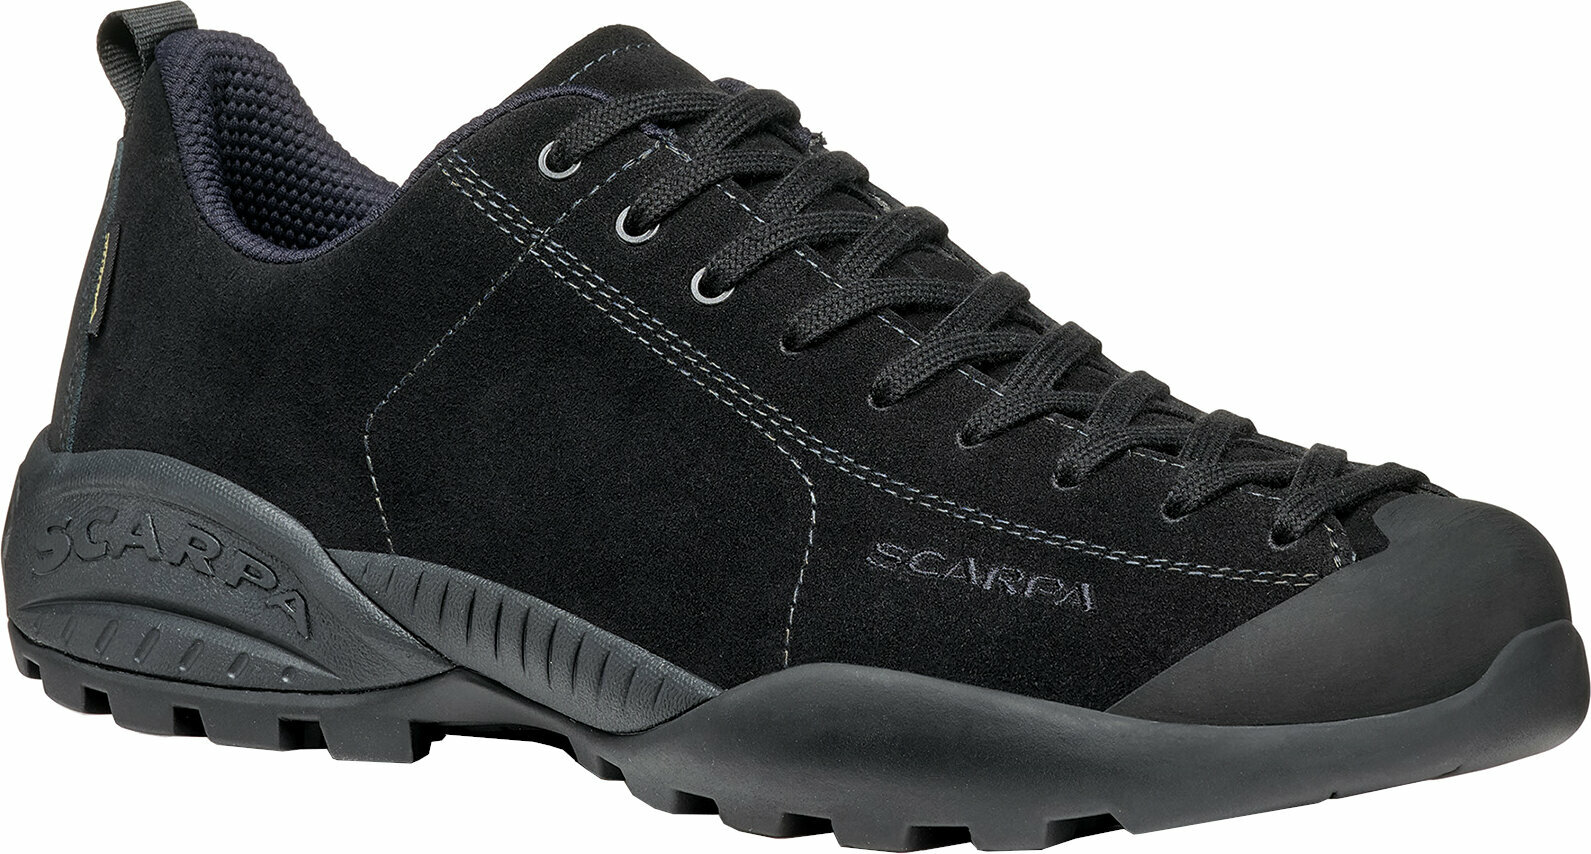 Scarpa Mojito GTX Black 44 Chaussures outdoor hommes male